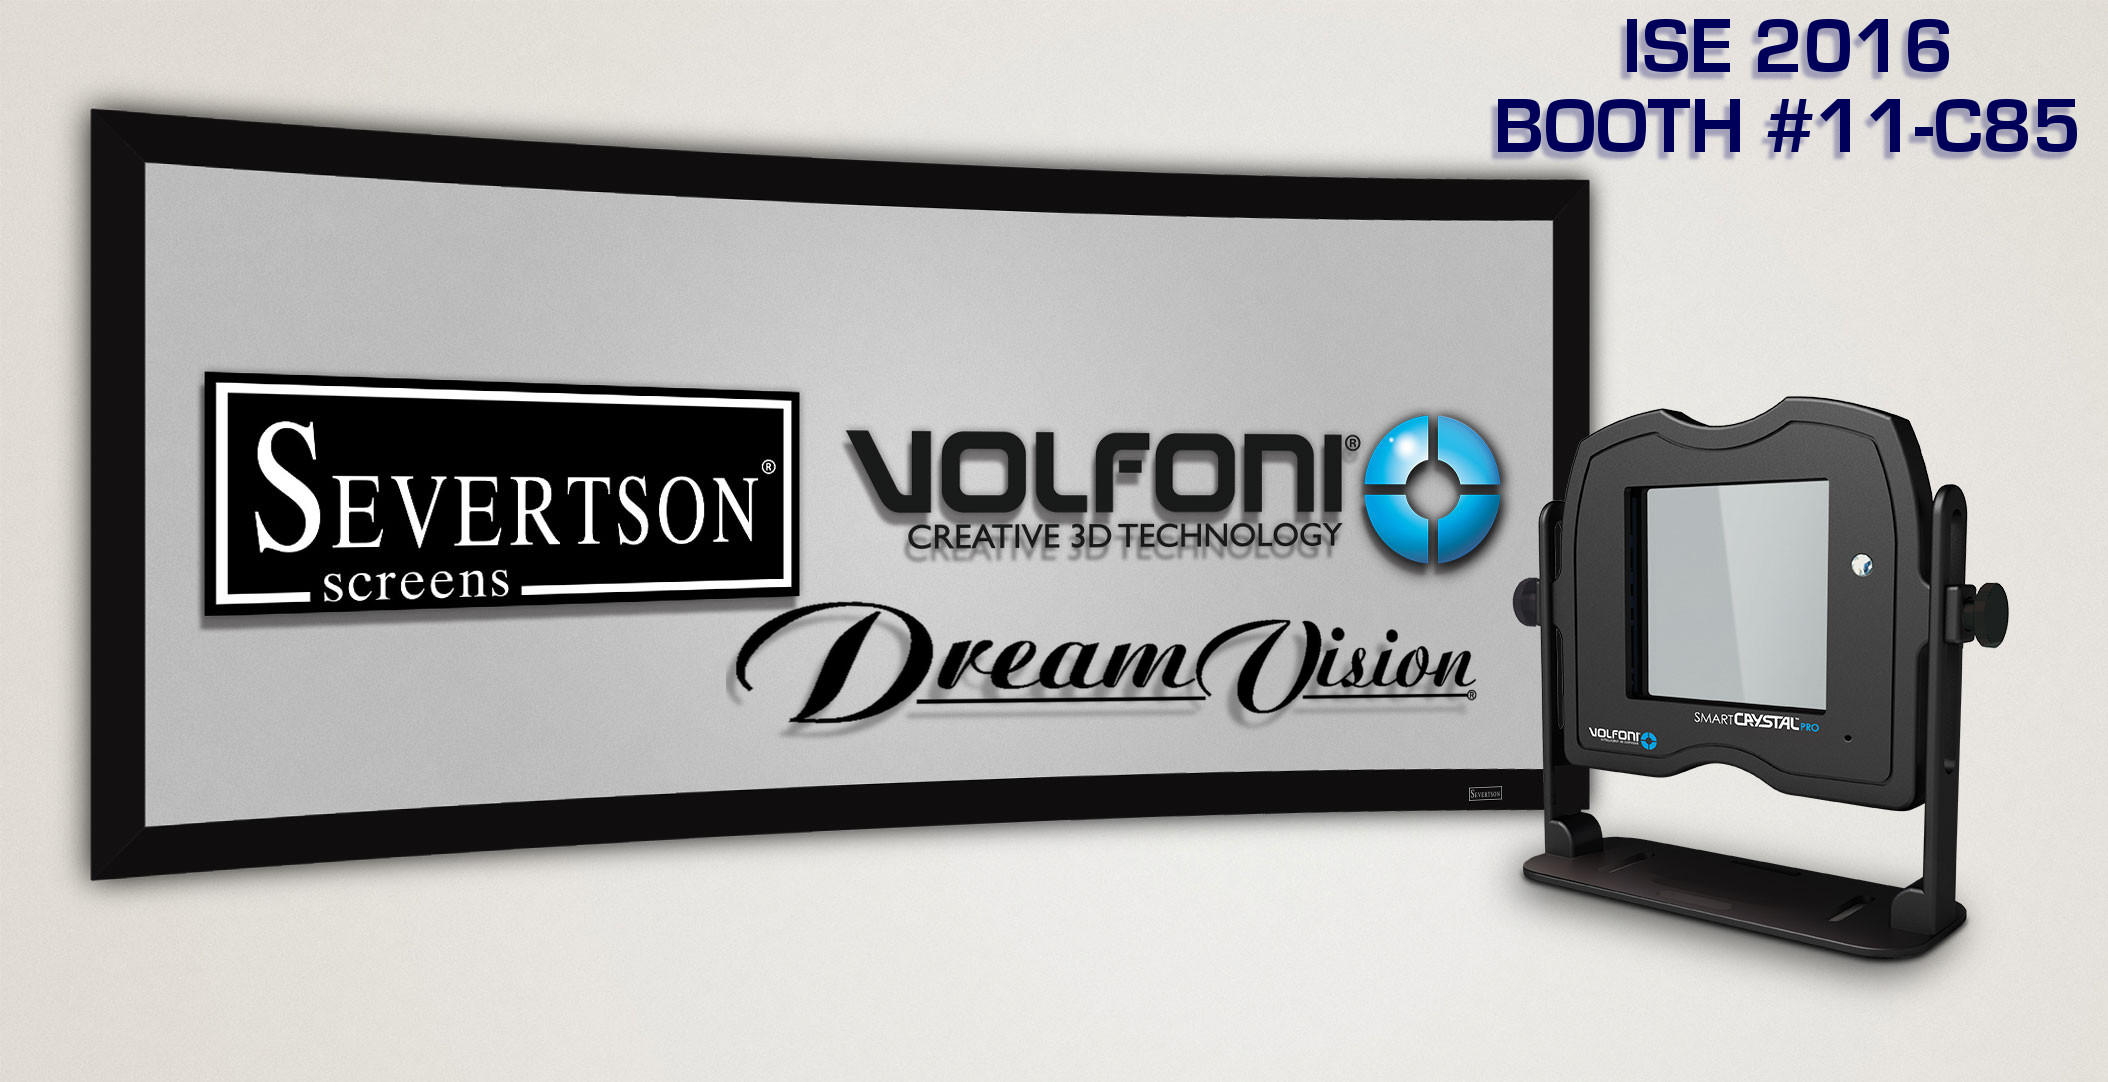 Volfoni, Severtson, and DreamVision 3D